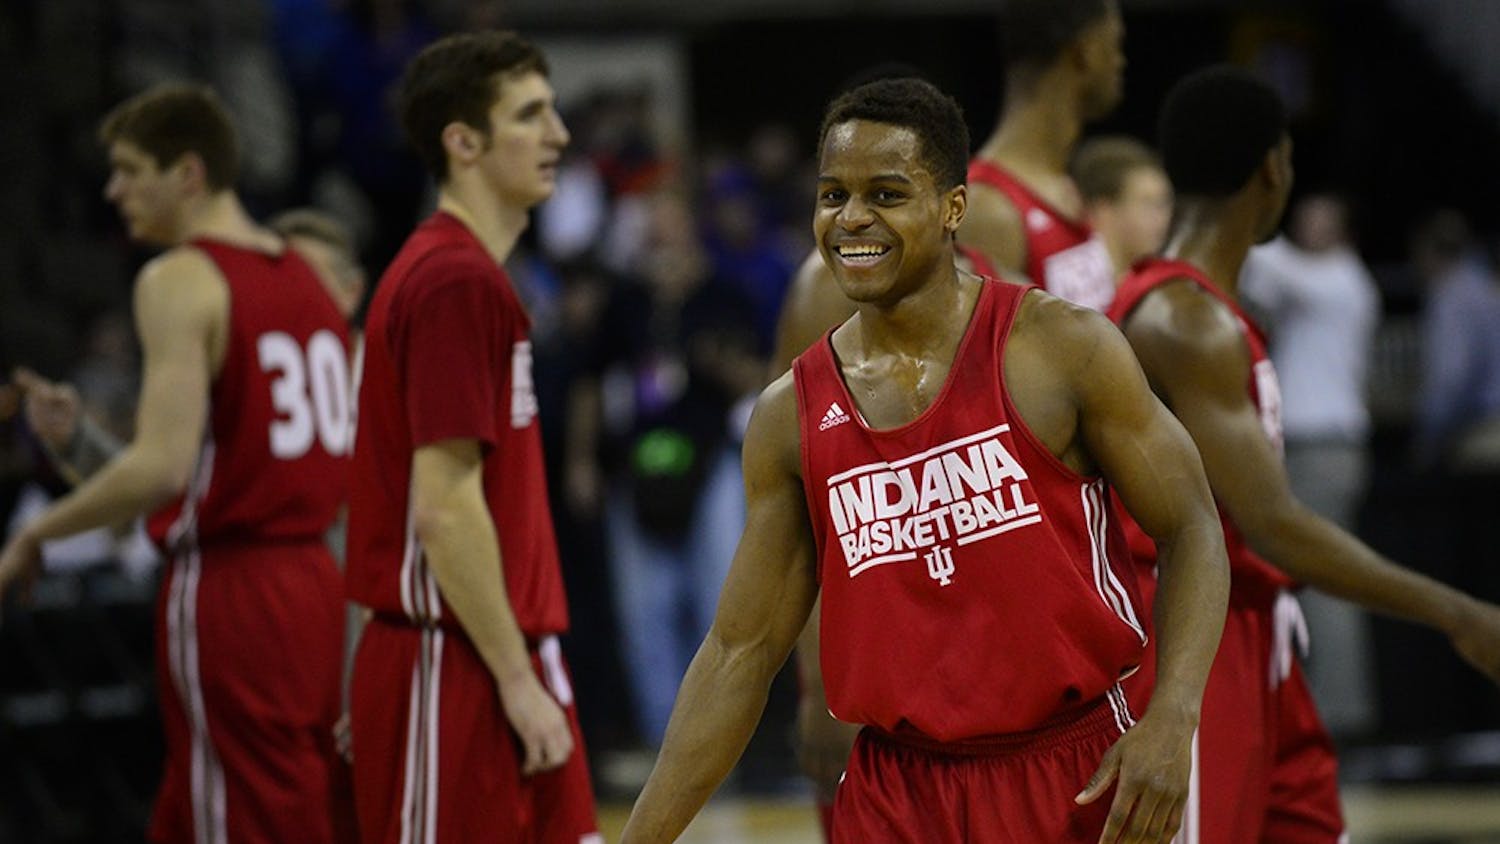 Junior guard Kevin "Yogi" Ferrell laughs after breaking from a huddle during practice Thursday at CenturyLink Center in Omaha, Neb.